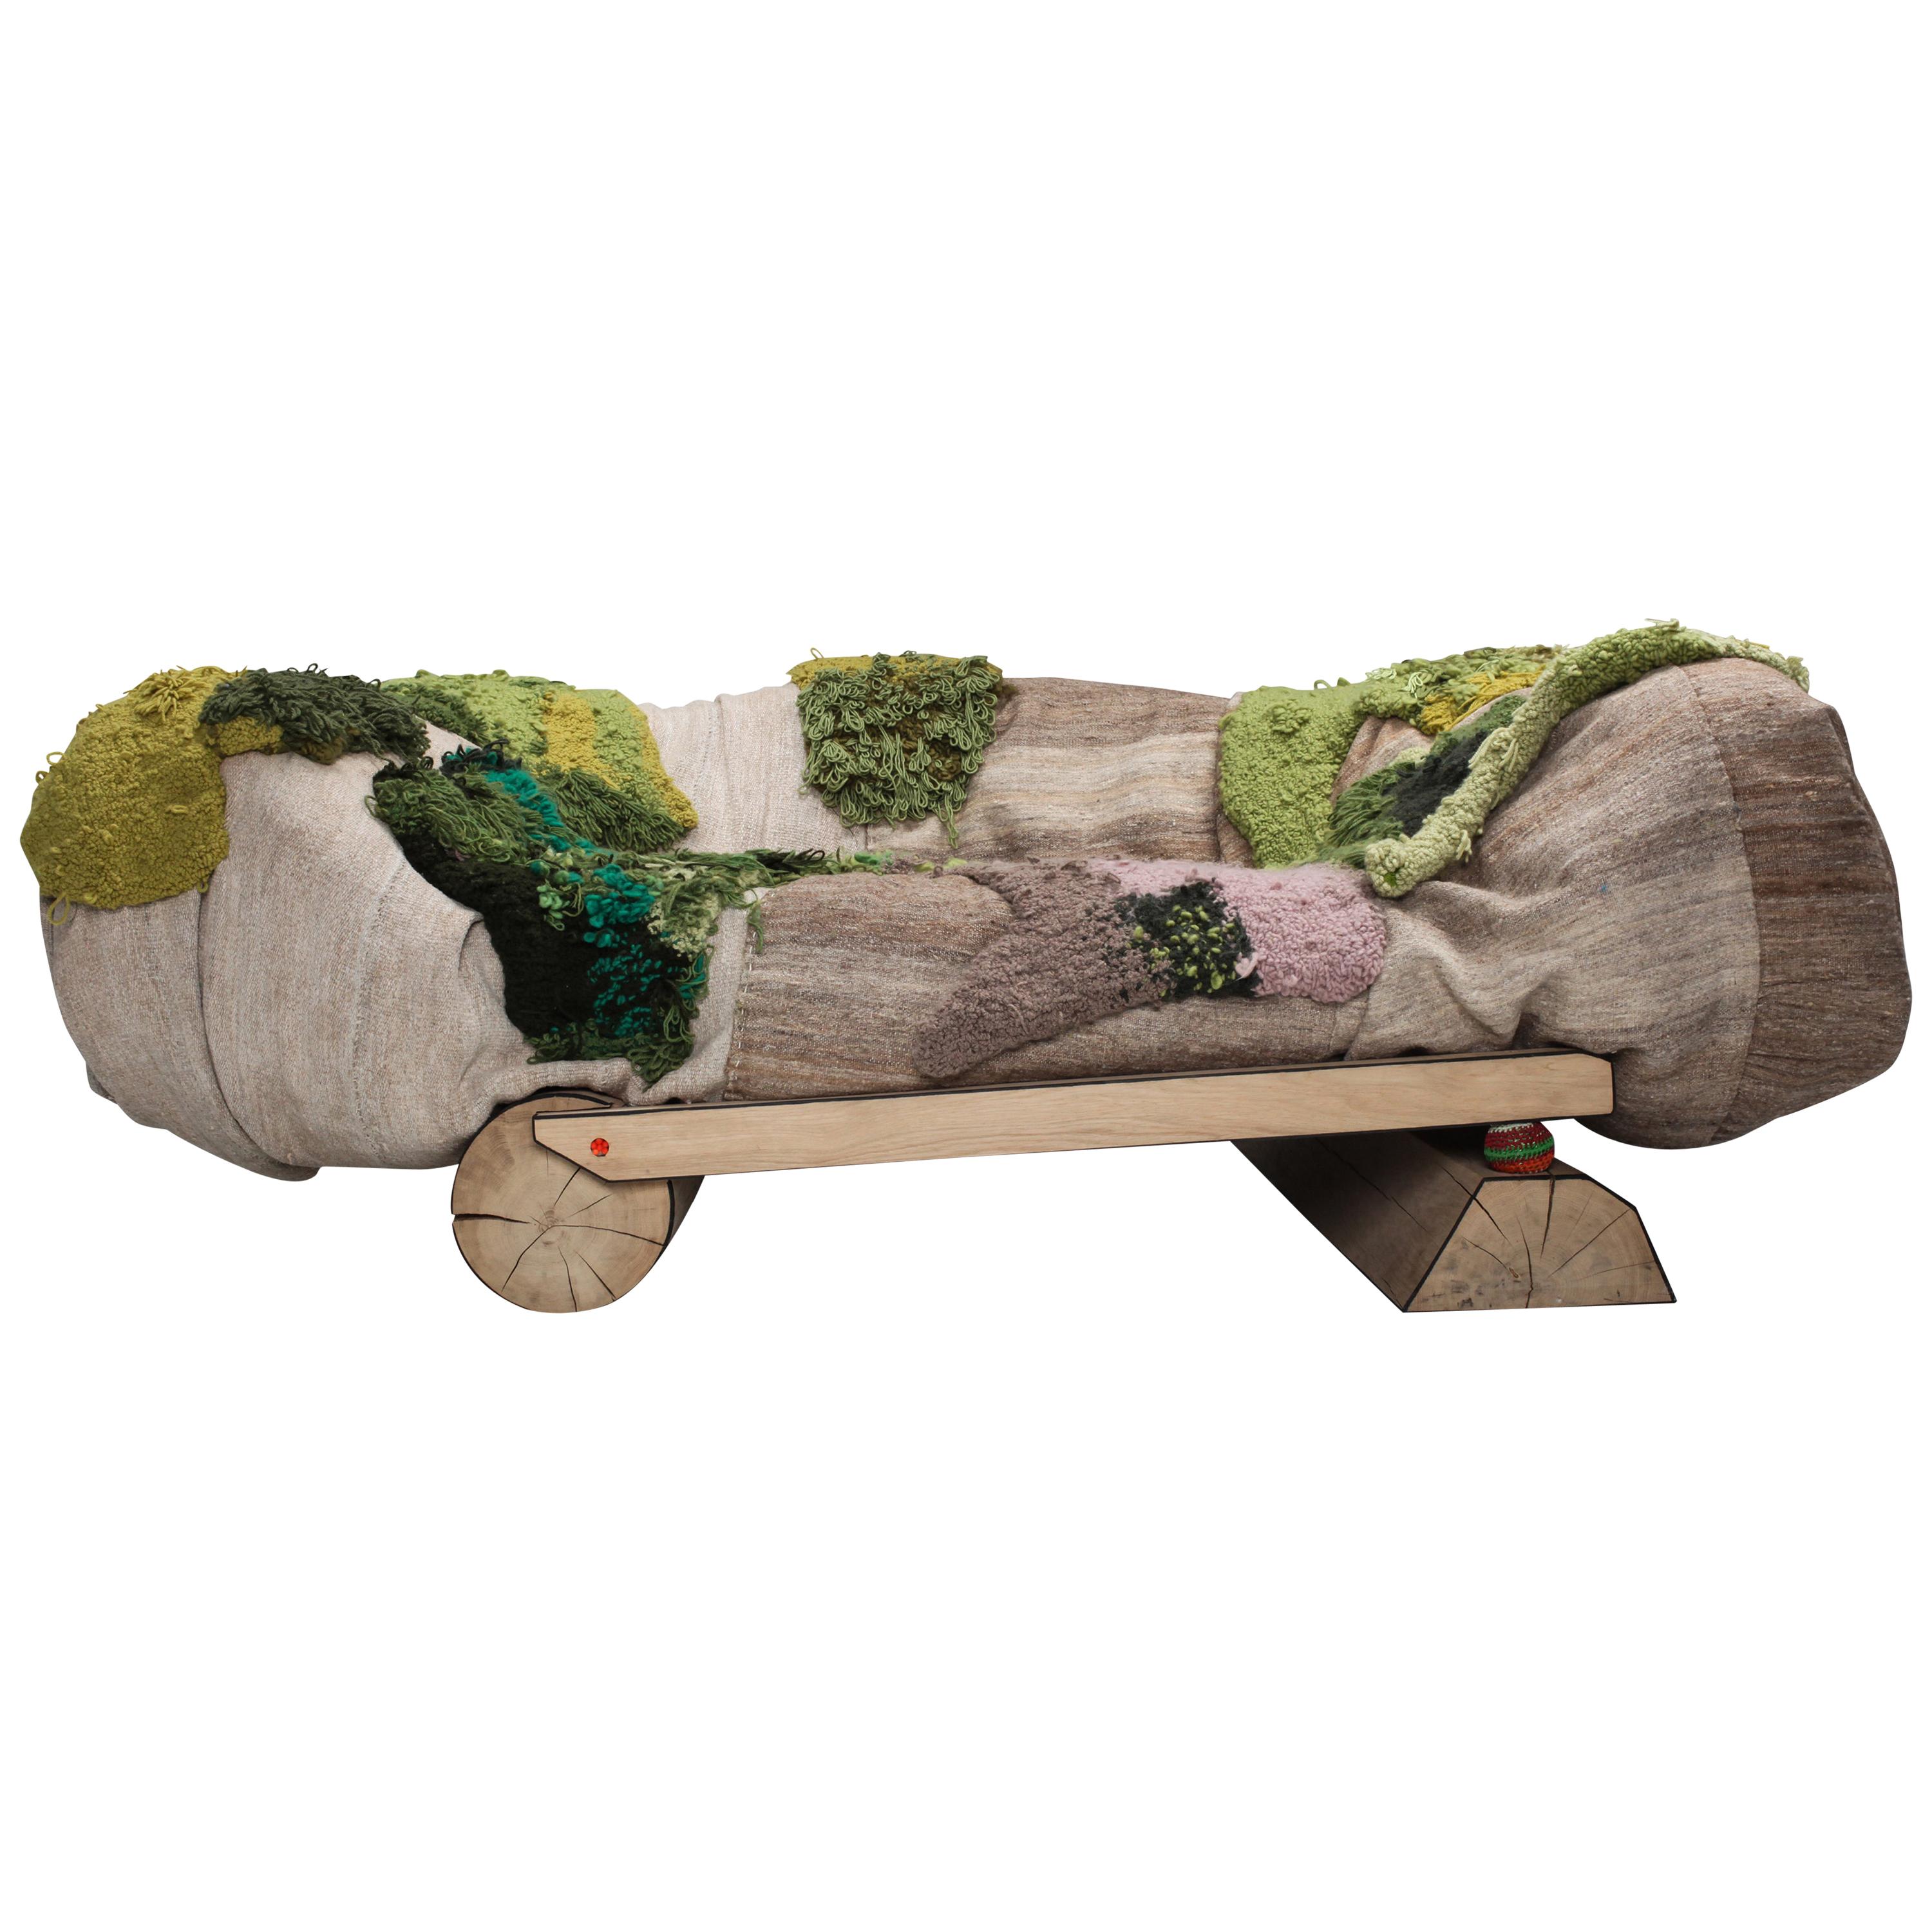 'Sit in My Valley II' Sofa by Lionel Jadot, 2020